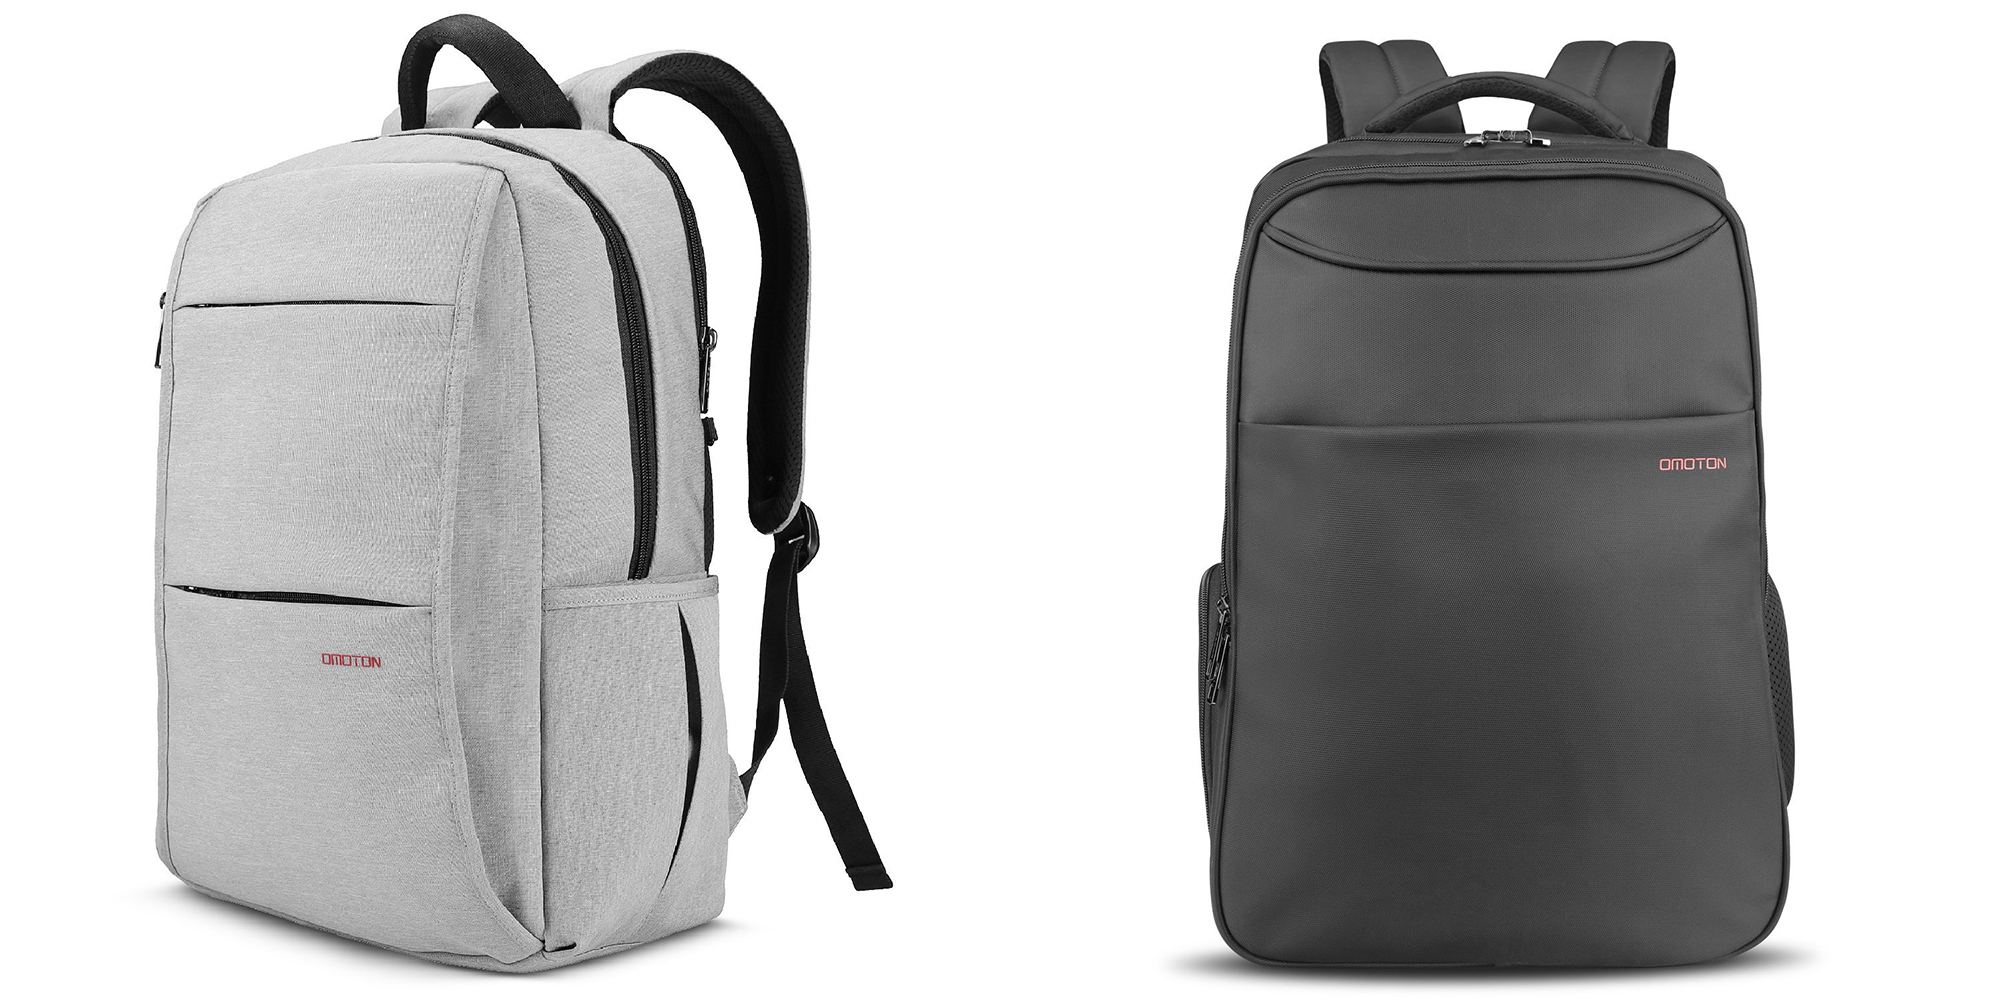 These $16 MacBook Backpacks come in 